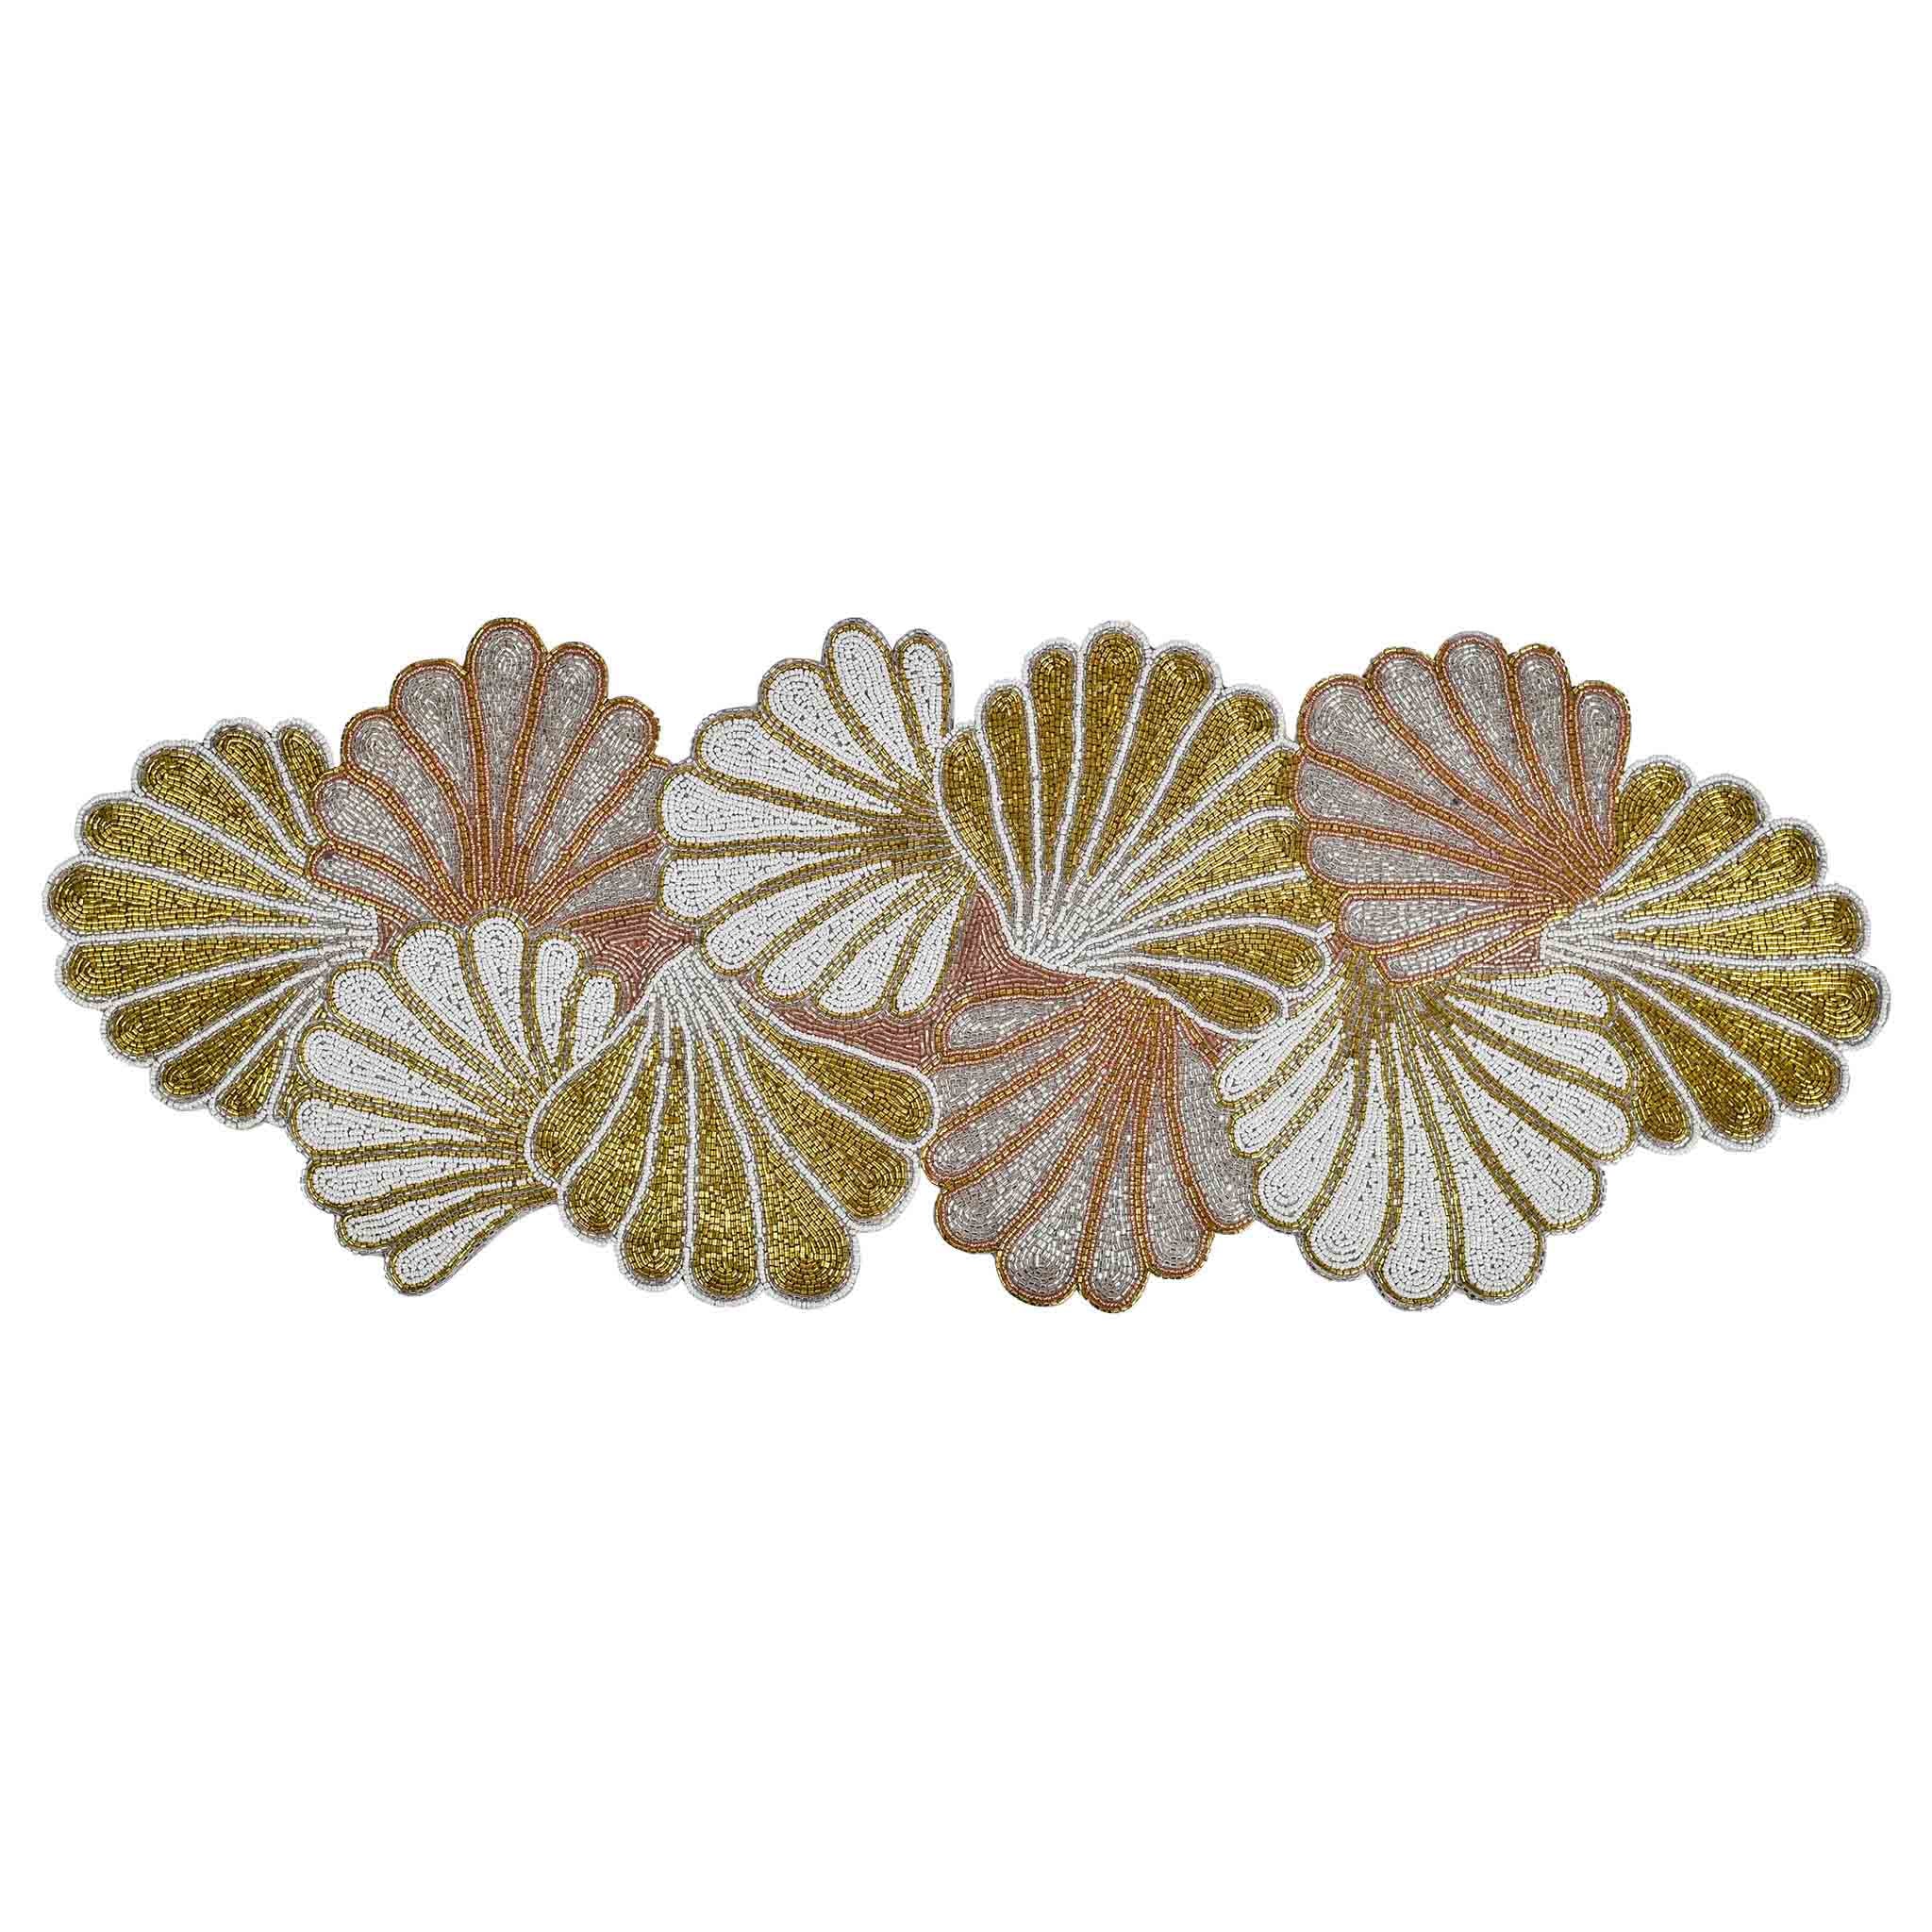 Scalloped Table Setting for 4 - Embroidered Placemats, Napkin Rings & Table Runner in Gold